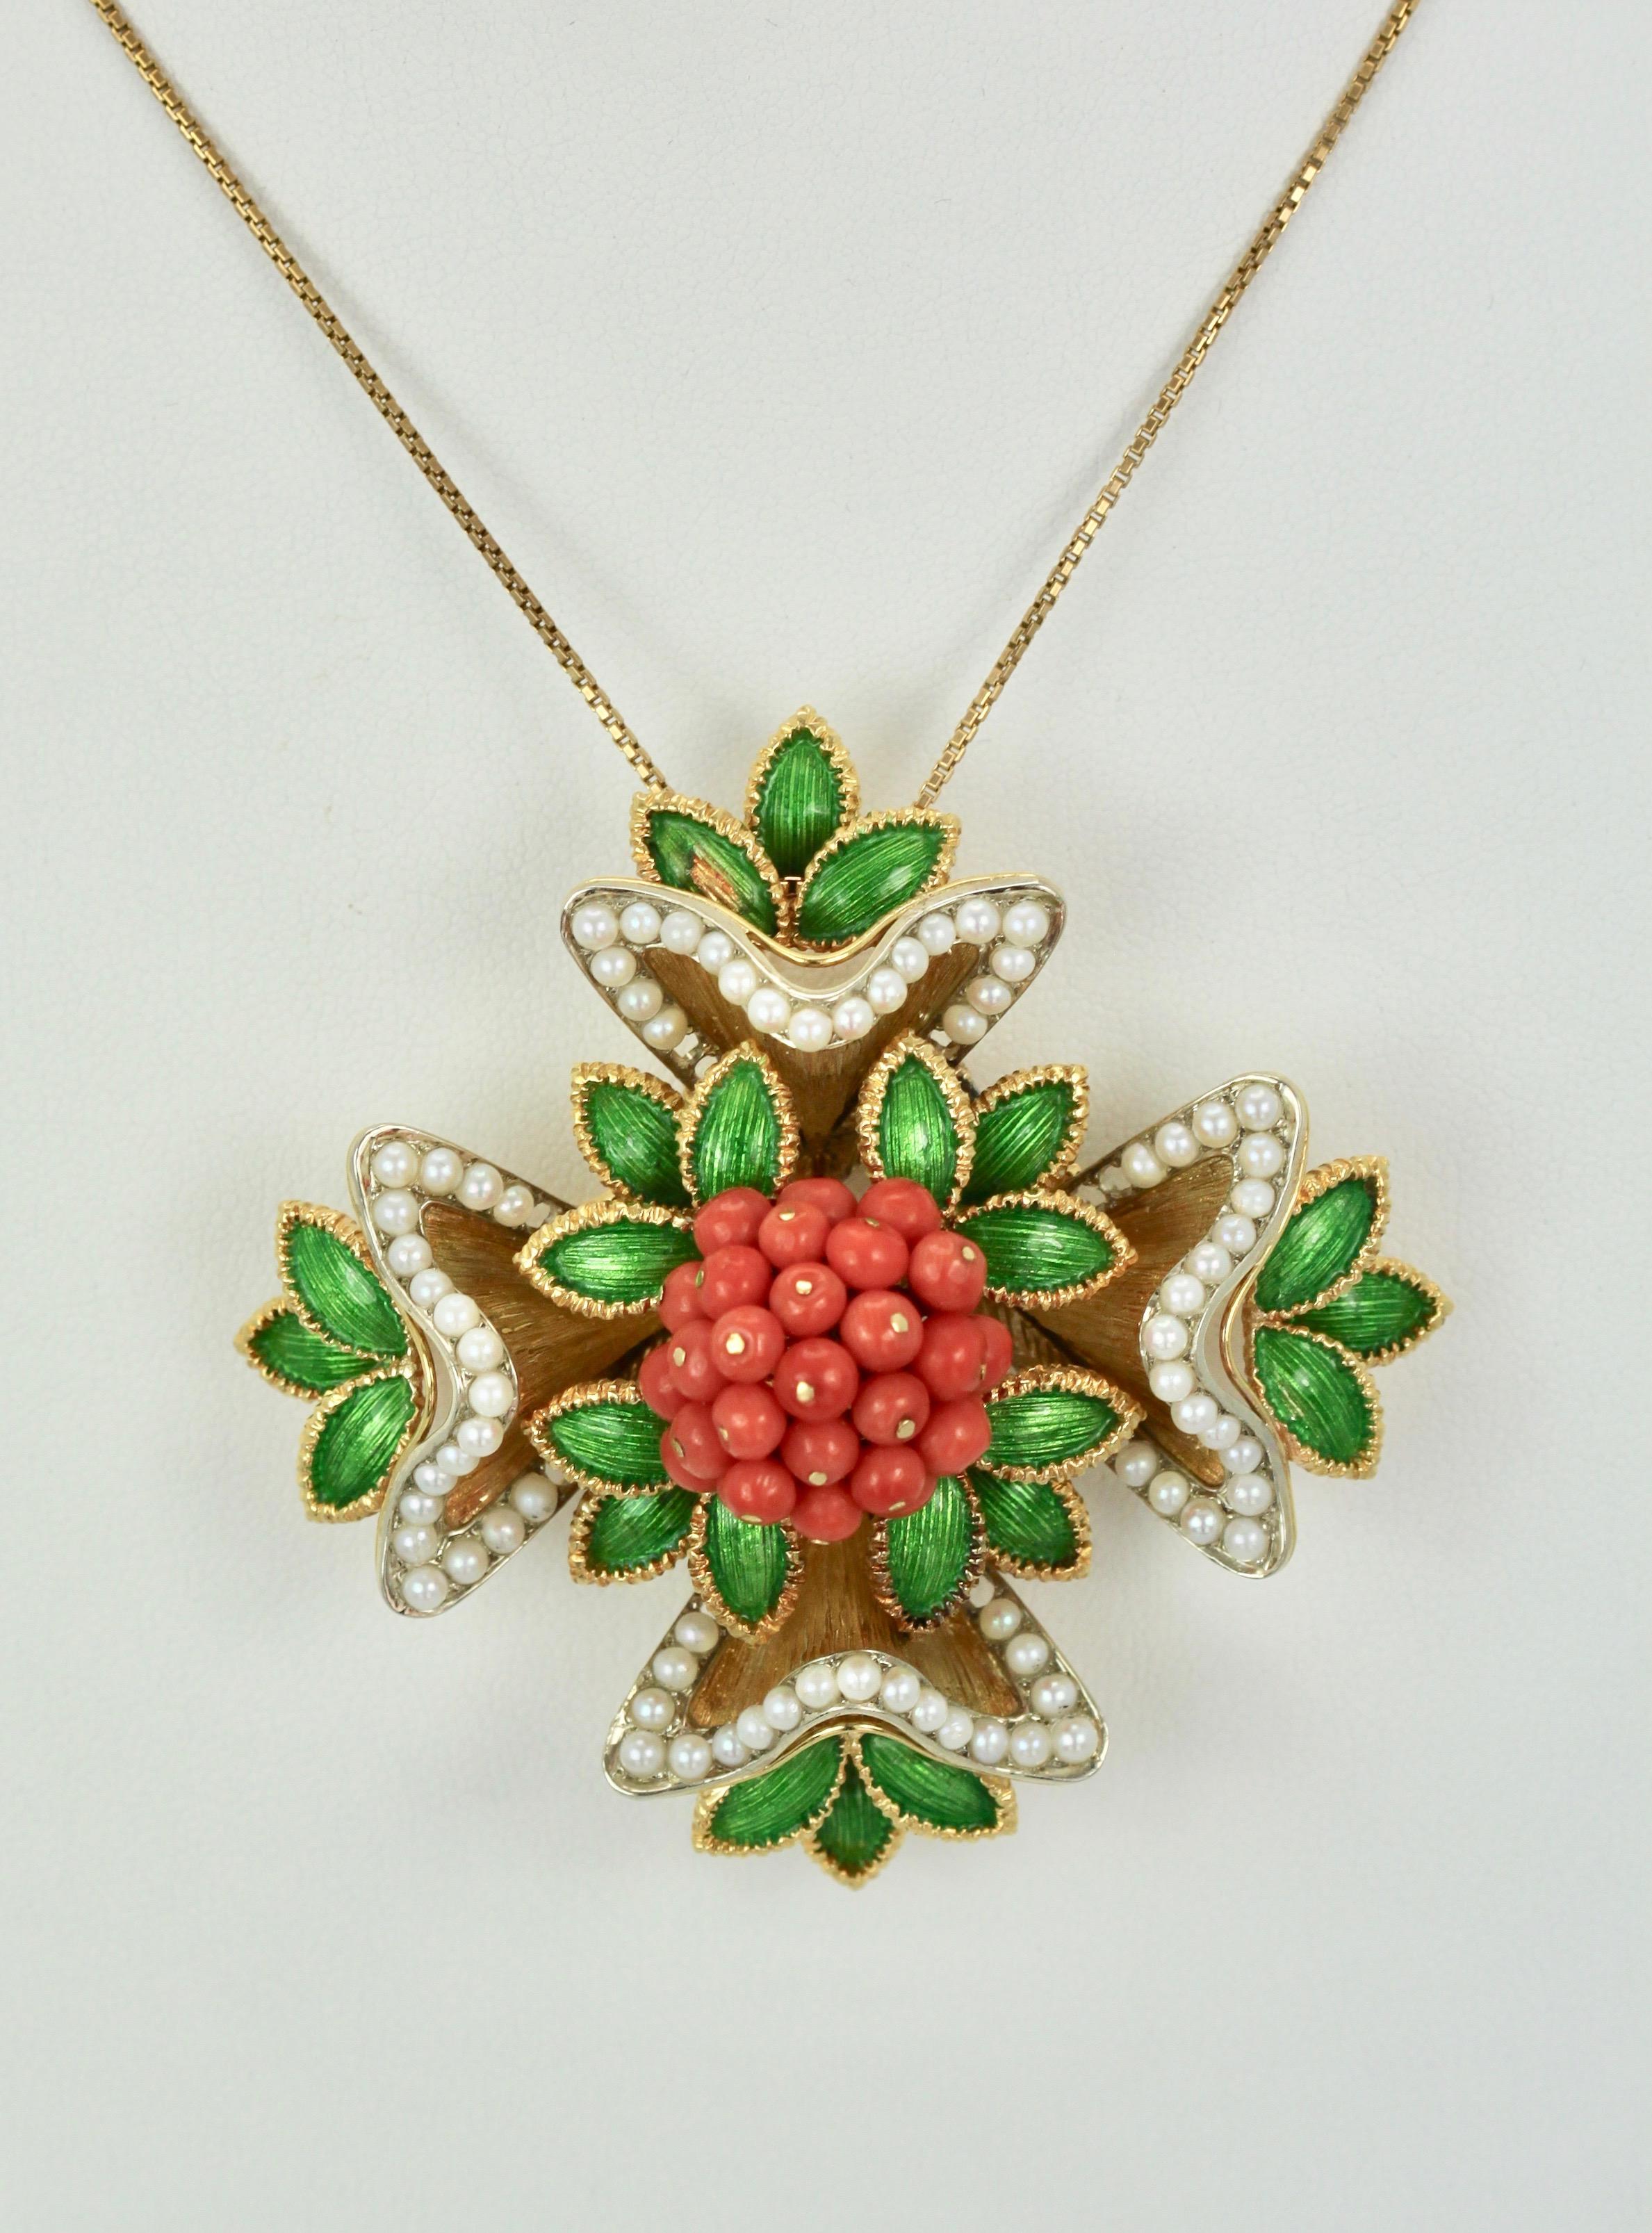 This extraordinary French Enamel Pearl Coral Maltese Cross Flower Brooch is remarkable.  The piece is done in 18k yellow Gold and features Coral beads and Seed Pearls all intact with Guilloche enamel in gorgeous green.  This brooch can be worn as a